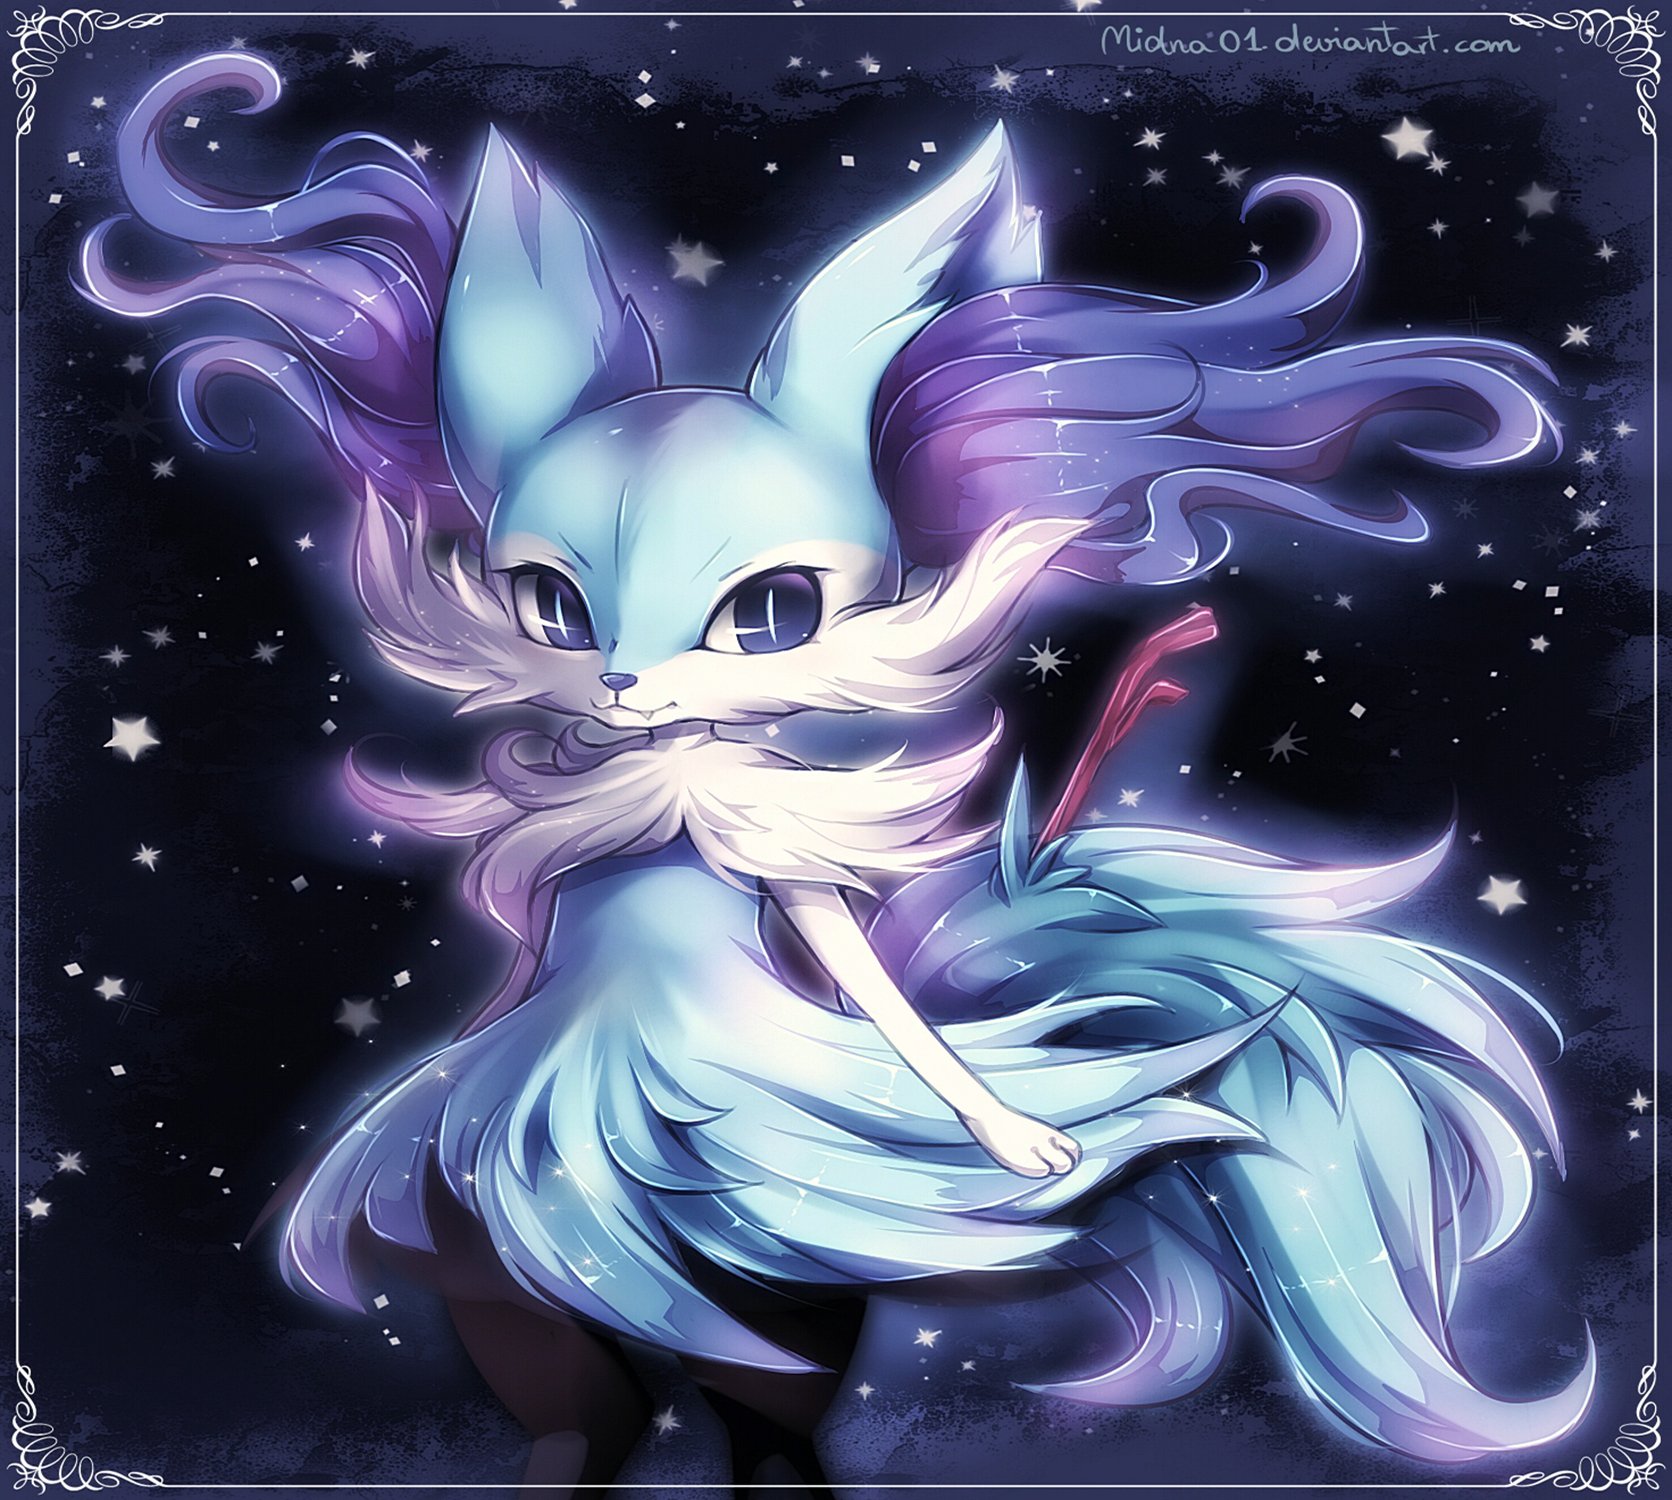 Ice Braixen by Midna01